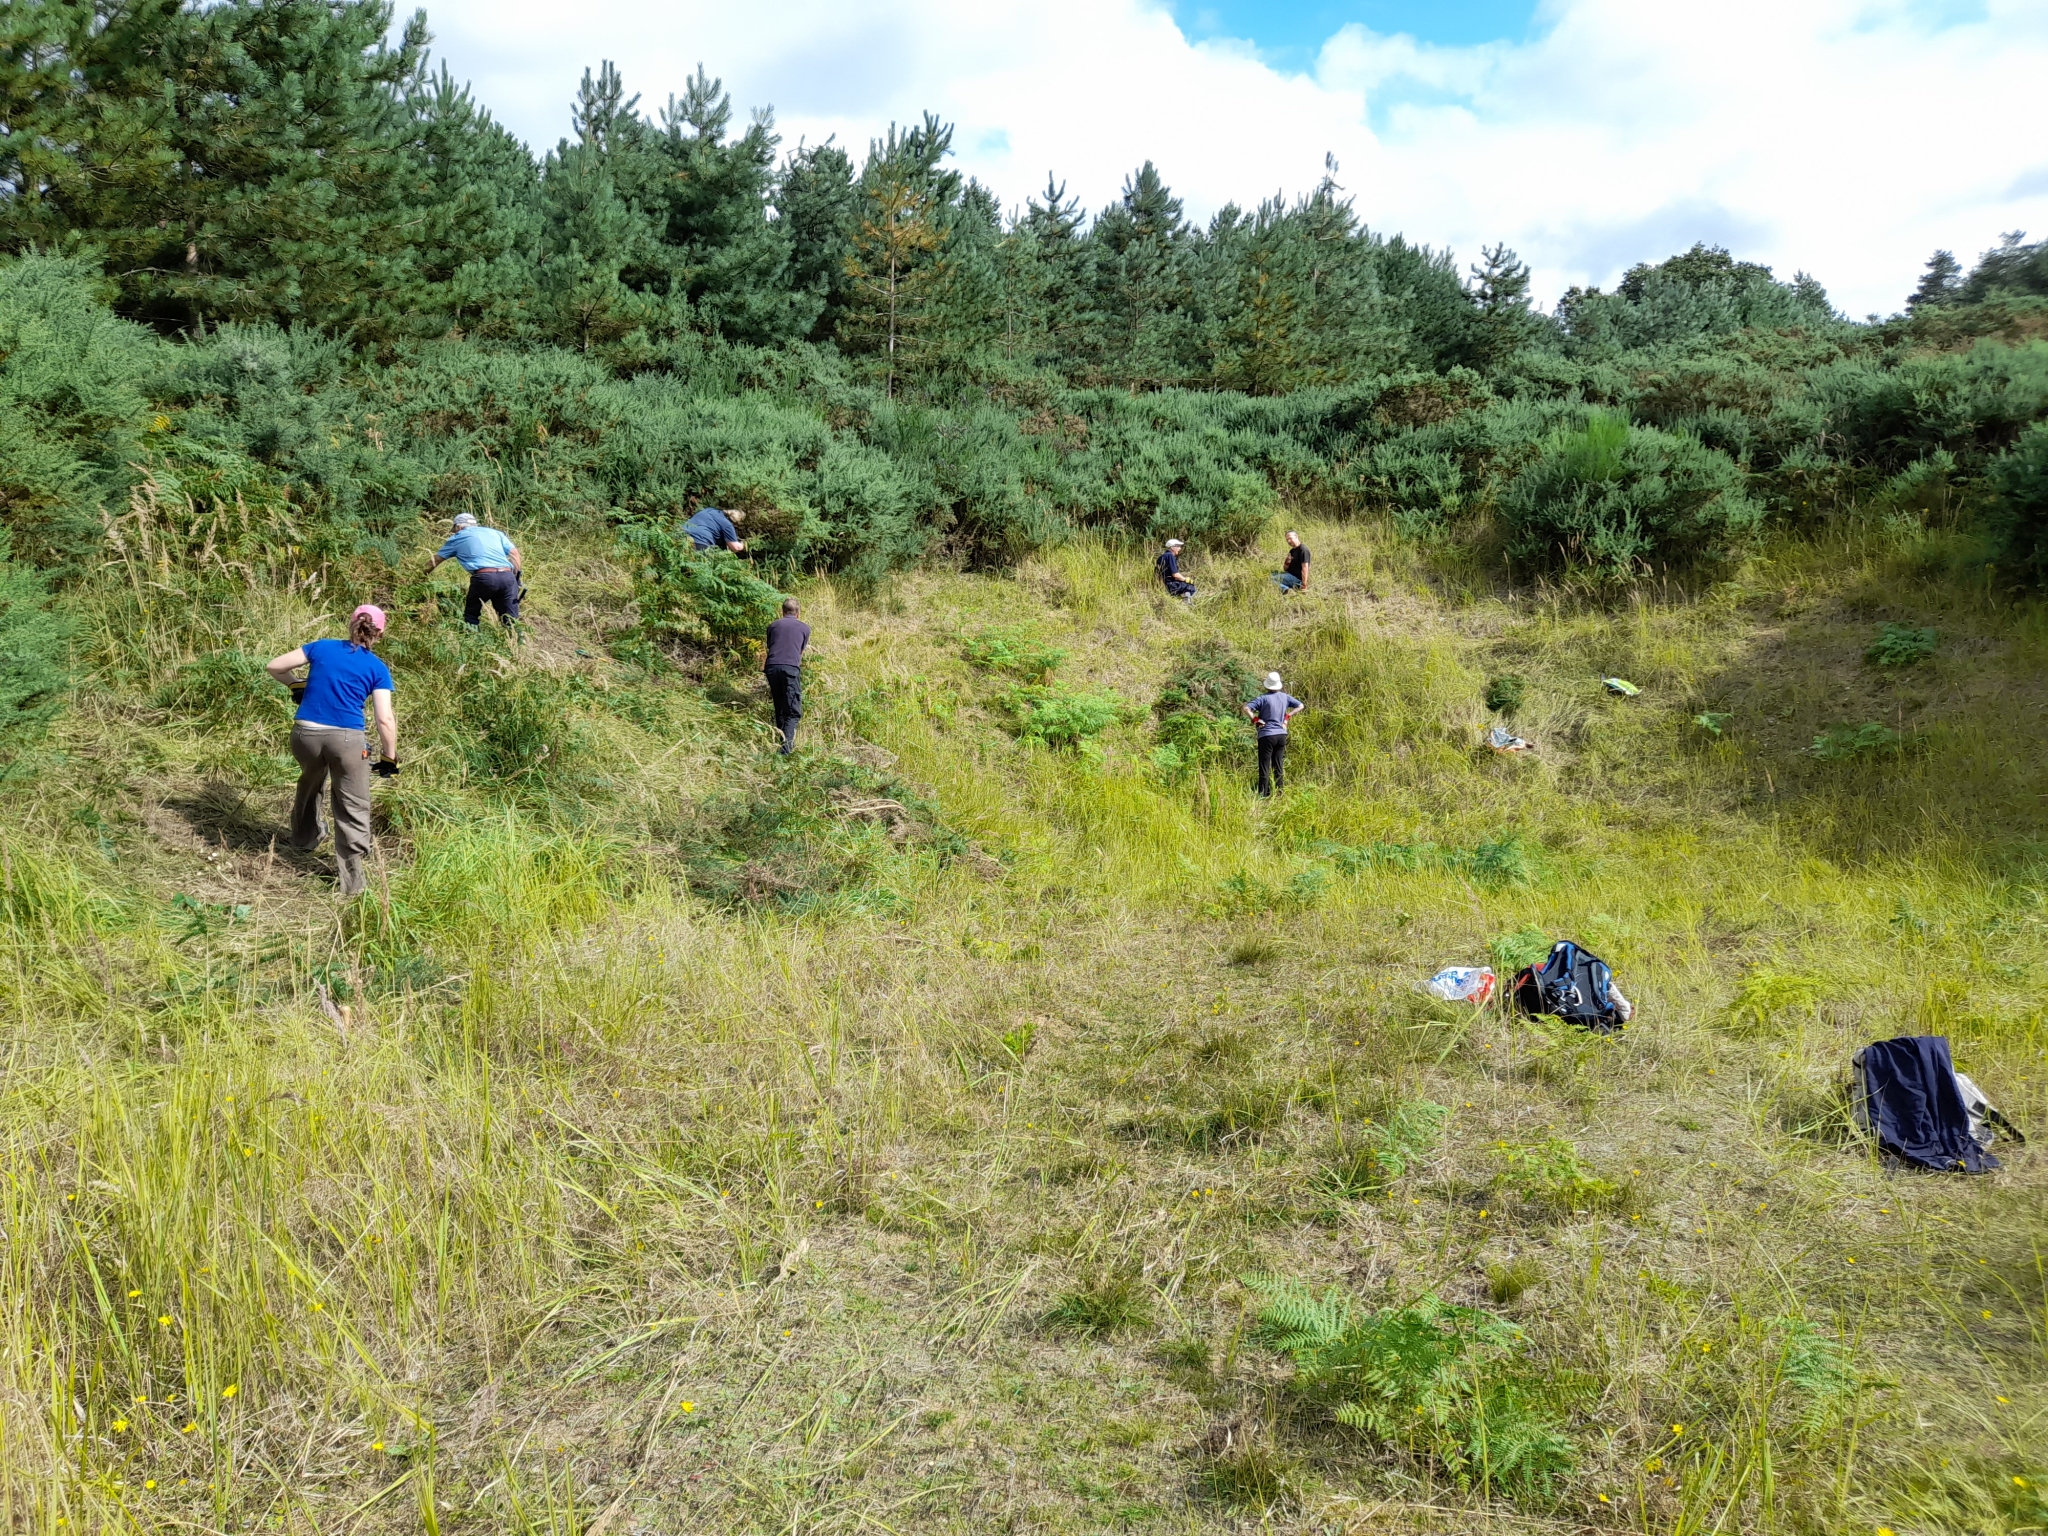 A photo from the FoTF Conservation Event - August 2021 - Maintenance tasks at Mildenhall Mugwort Pit & Mildenhall Warren Lodge : Volunteers work on the slope of the Mugworth pit clearing Gorse and vegetation